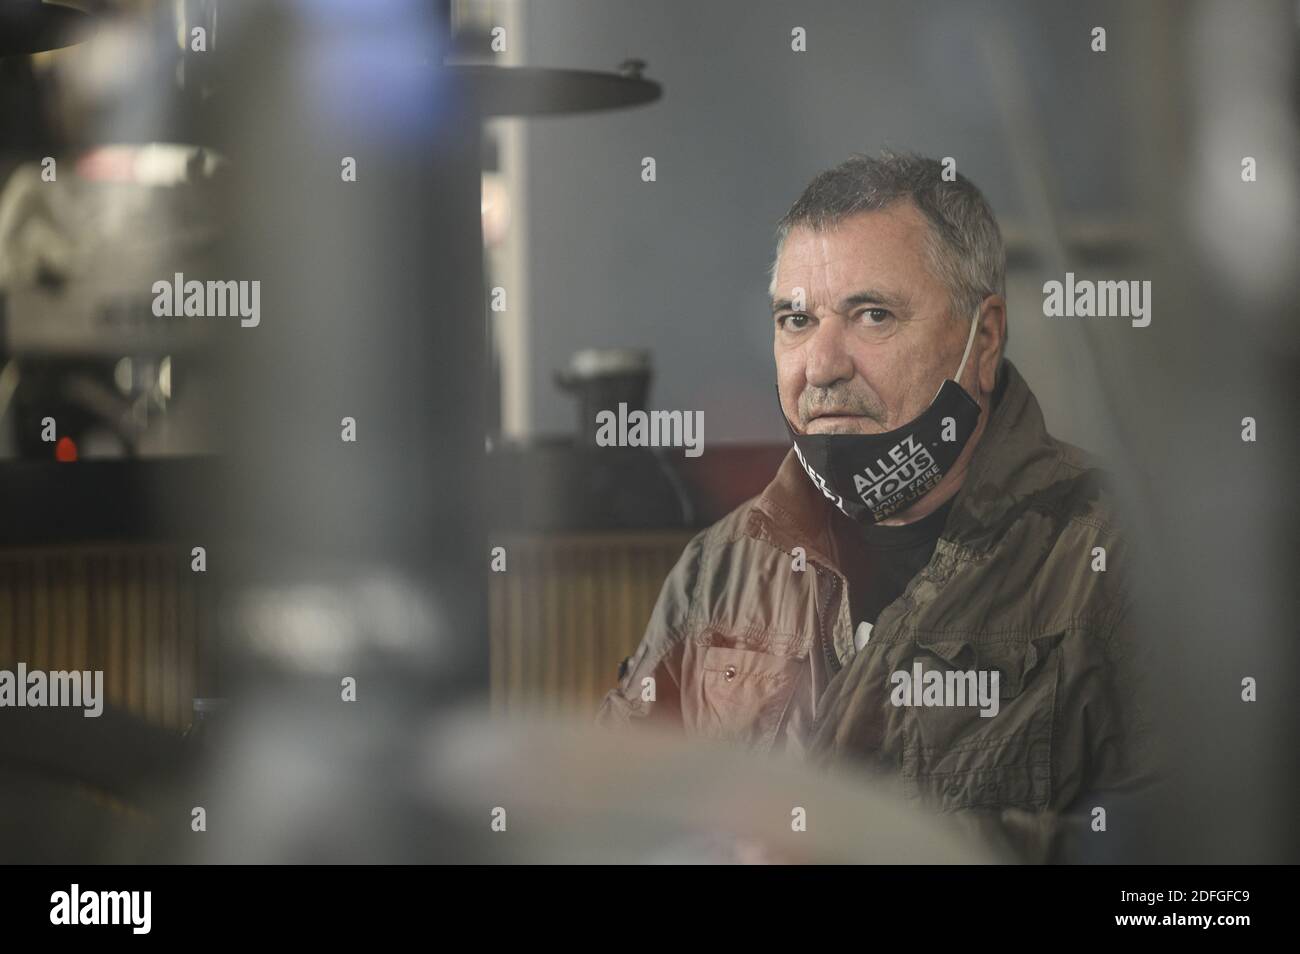 Jean Marie Bigard High Resolution Stock Photography and Images - Alamy